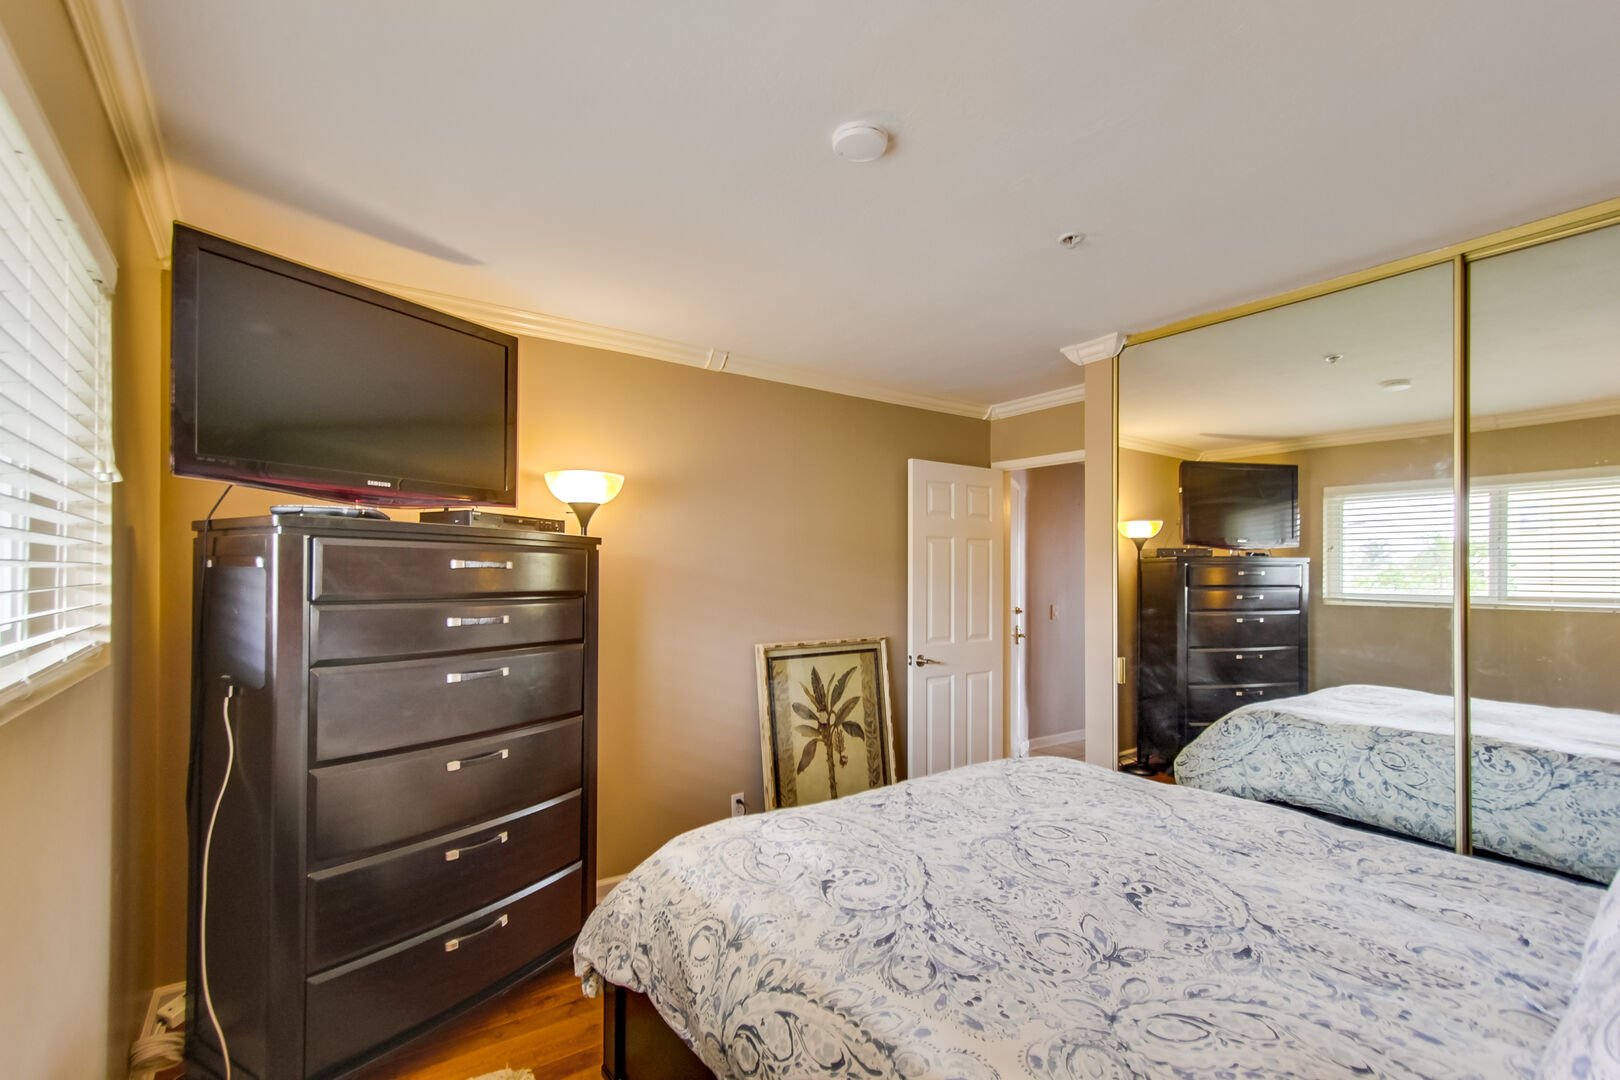 Bedroom with queen bed, TV, mirrored closets and lamps